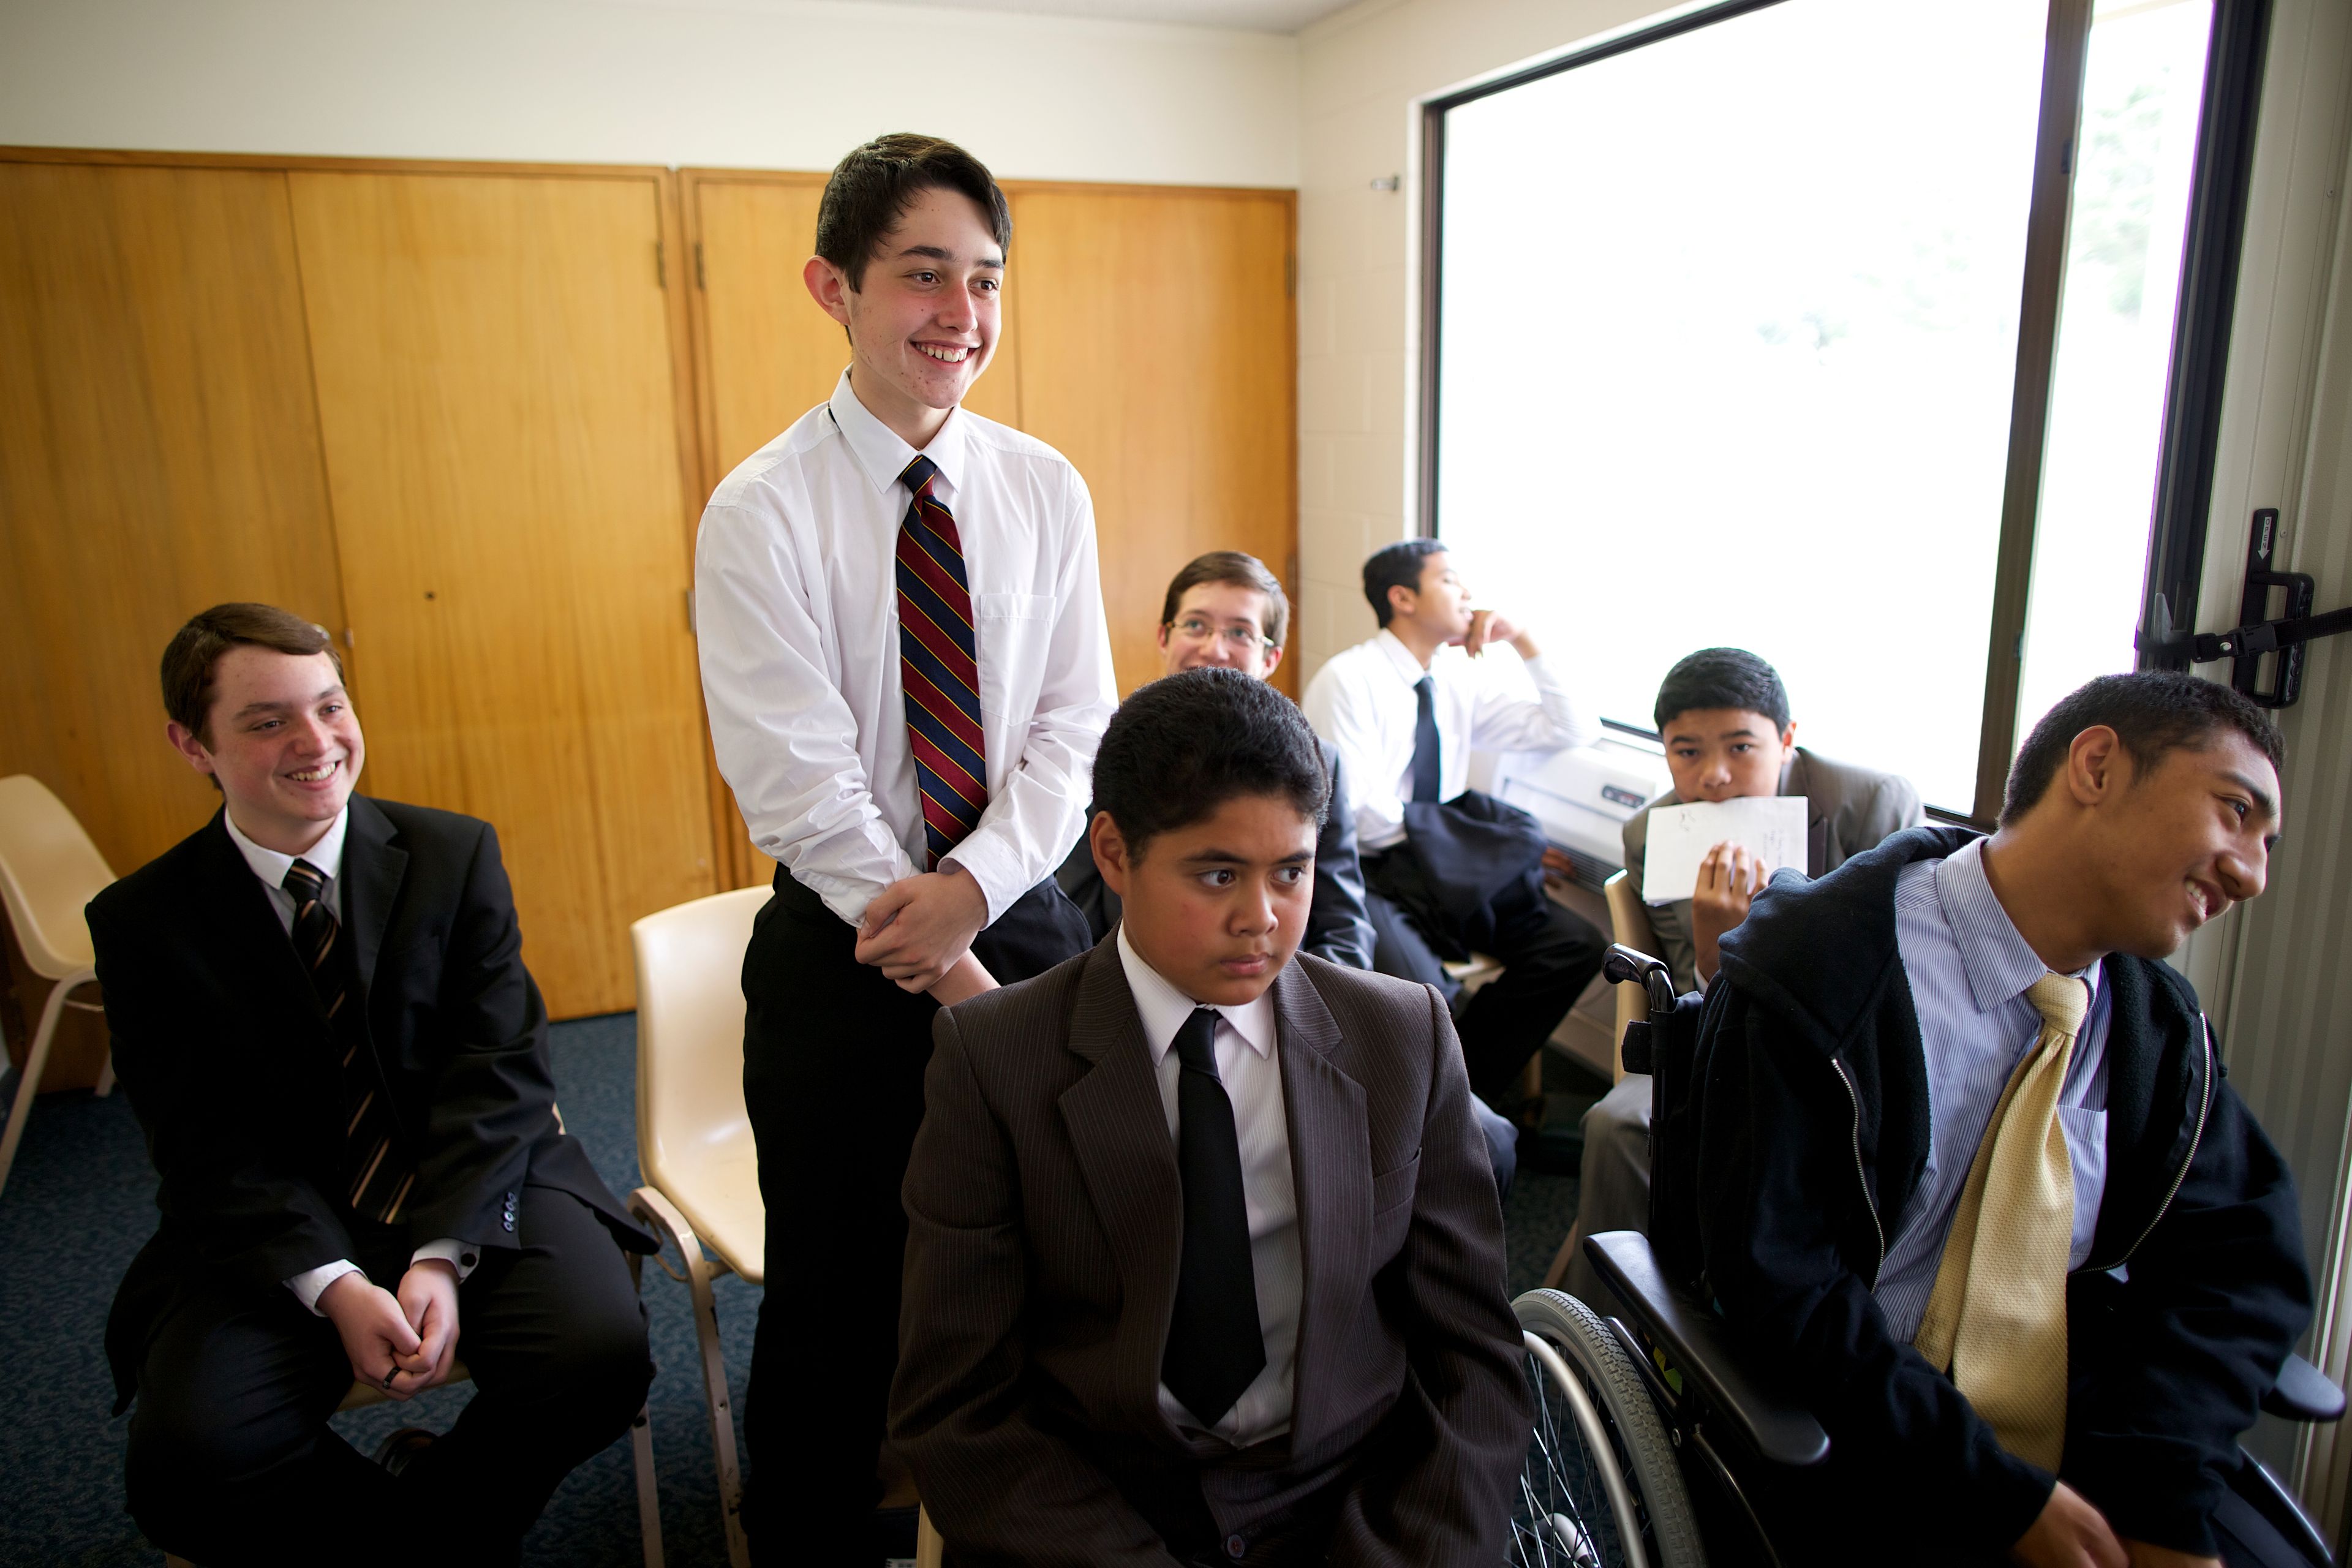 A young man stands up during priesthood meeting, surrounded by his classmates.  